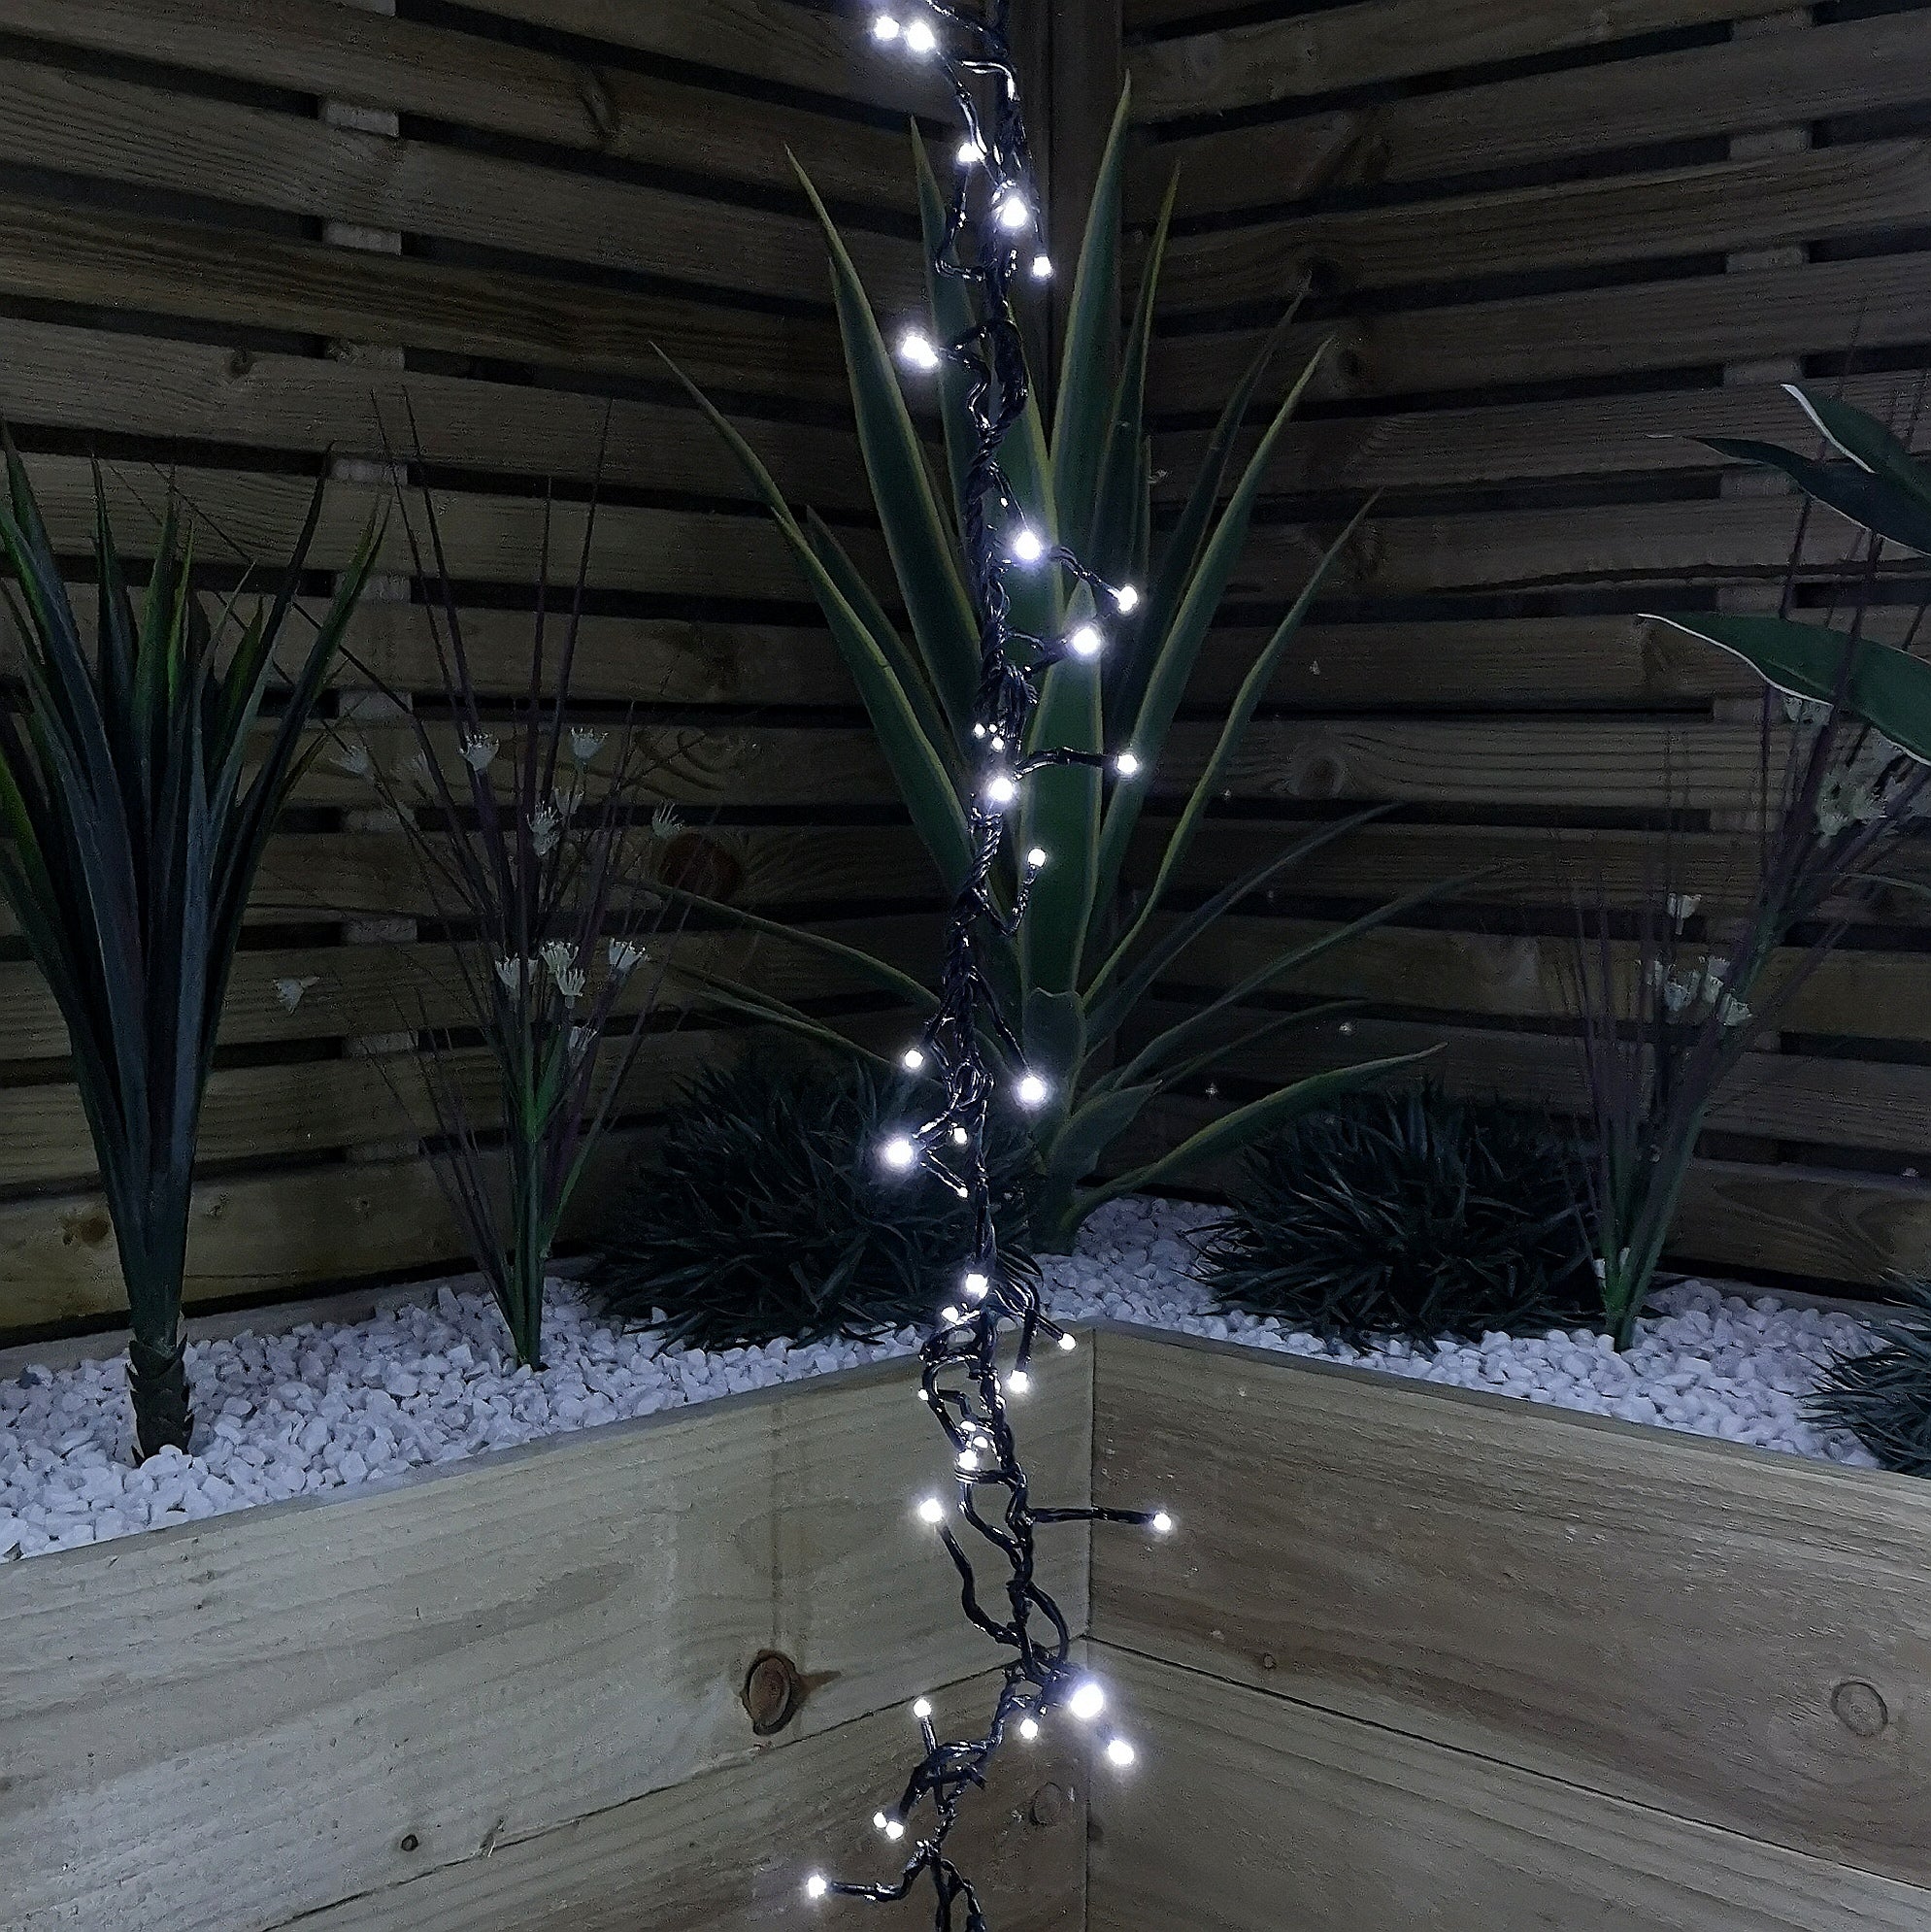 Set of 6 Drop Tree Multi-Action Christmas ClusterBrights with 384 White LEDs